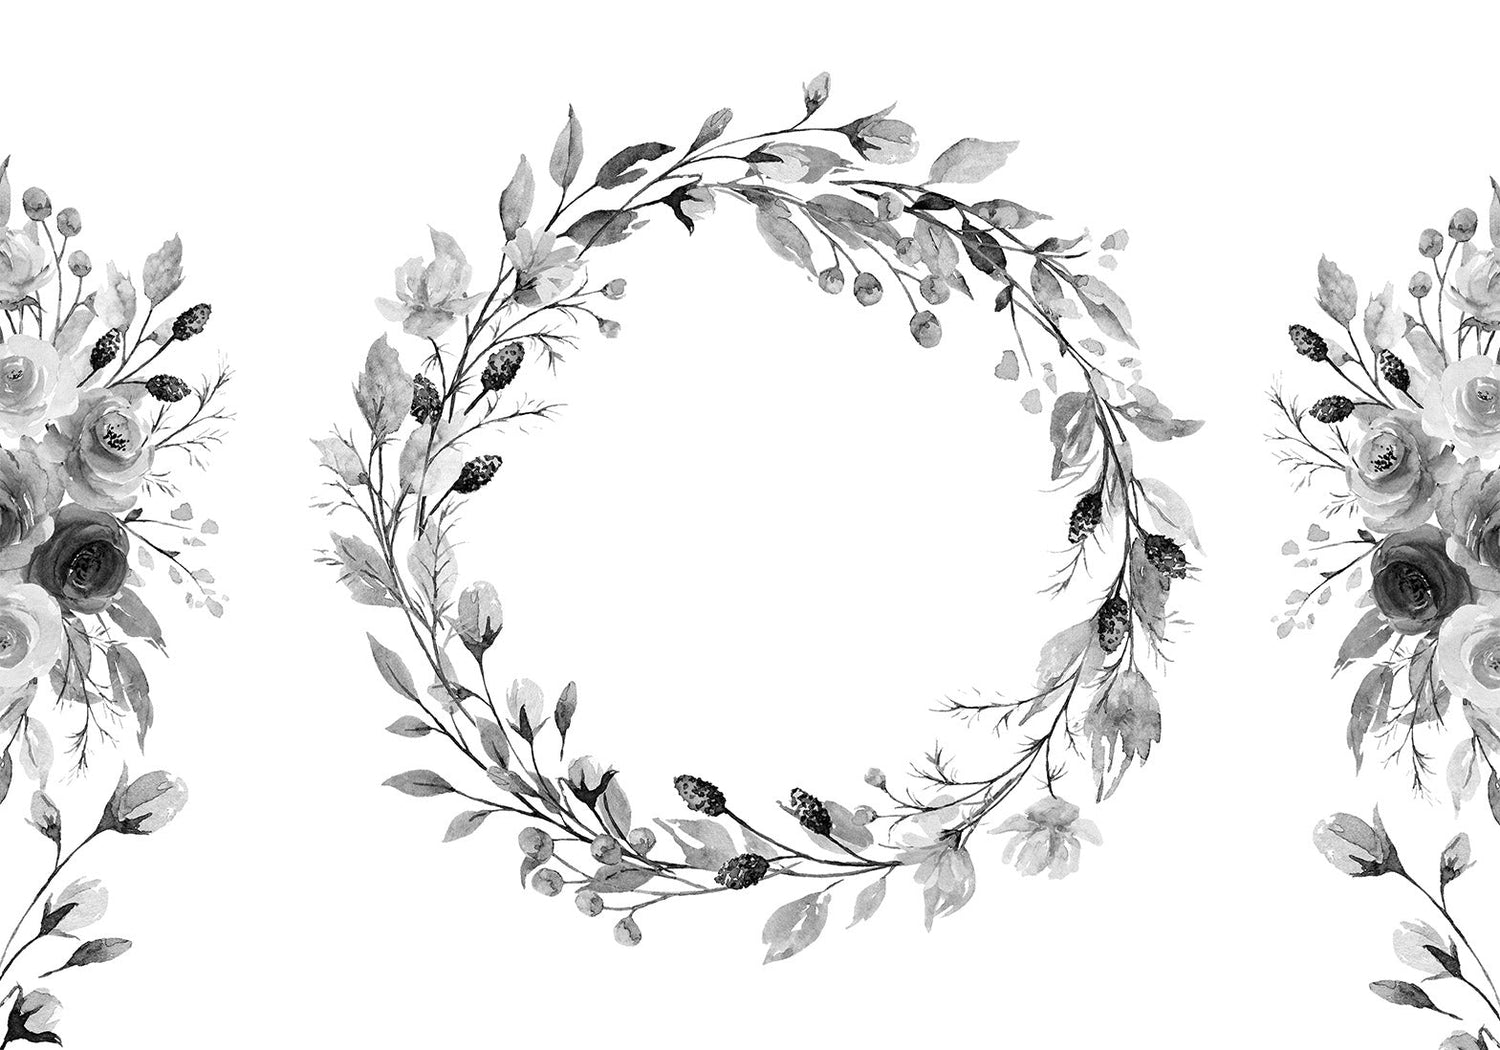 Peel & Stick Floral Wall Mural - Romantic Wreath Grey - Removable Wallpaper